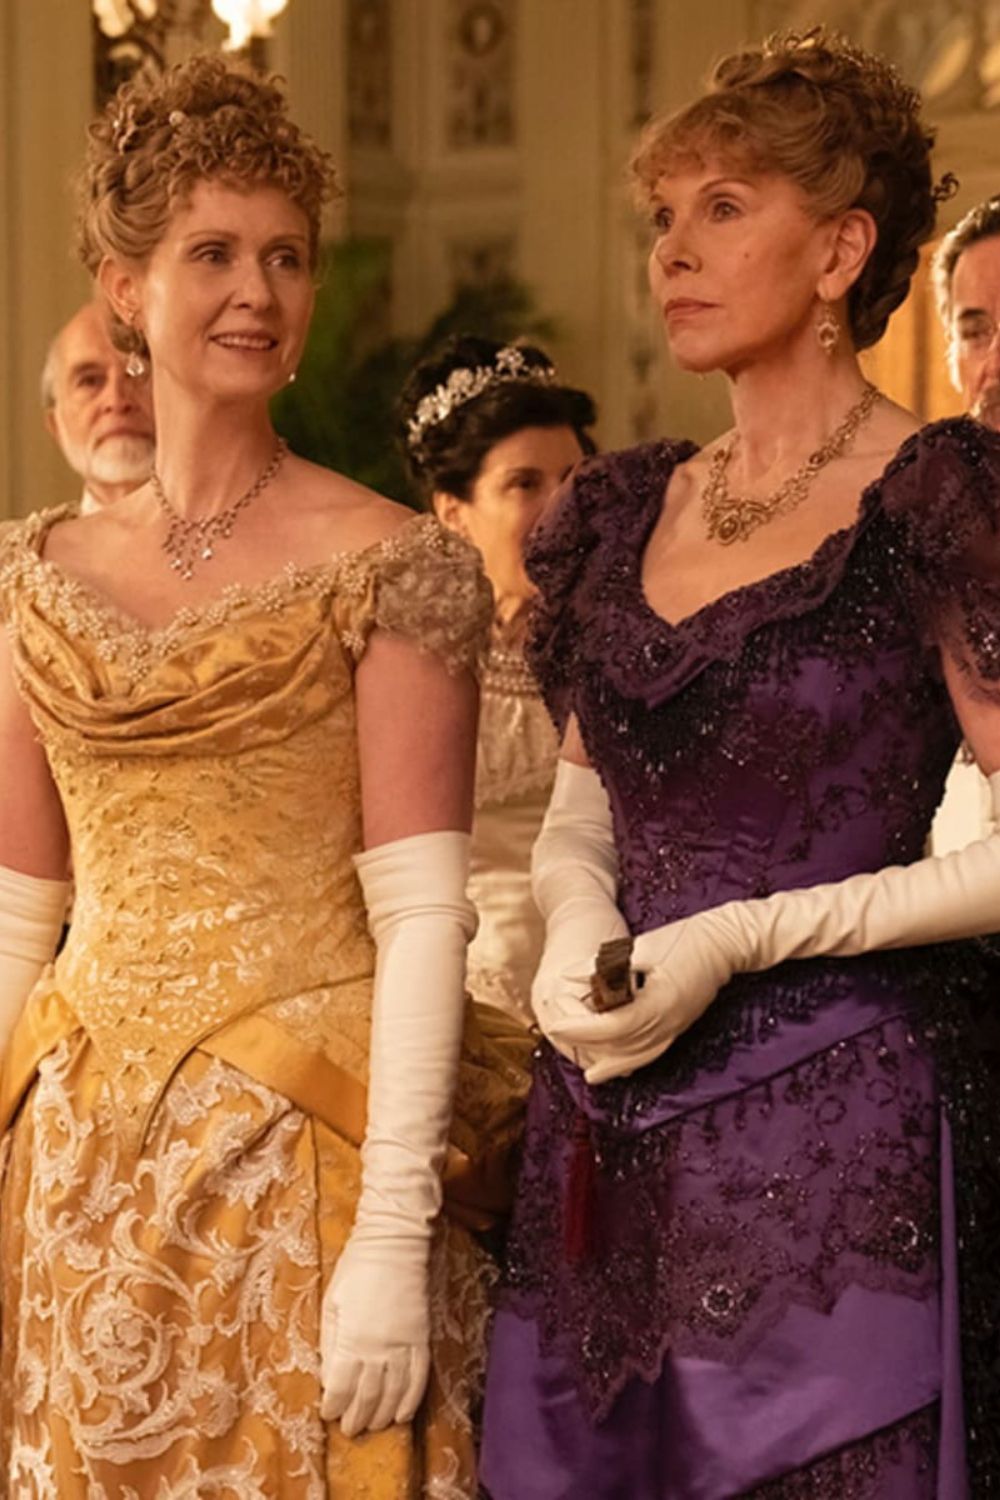 Still photo of two women in ornate ballroom attire from HBO's series The Gilded Age